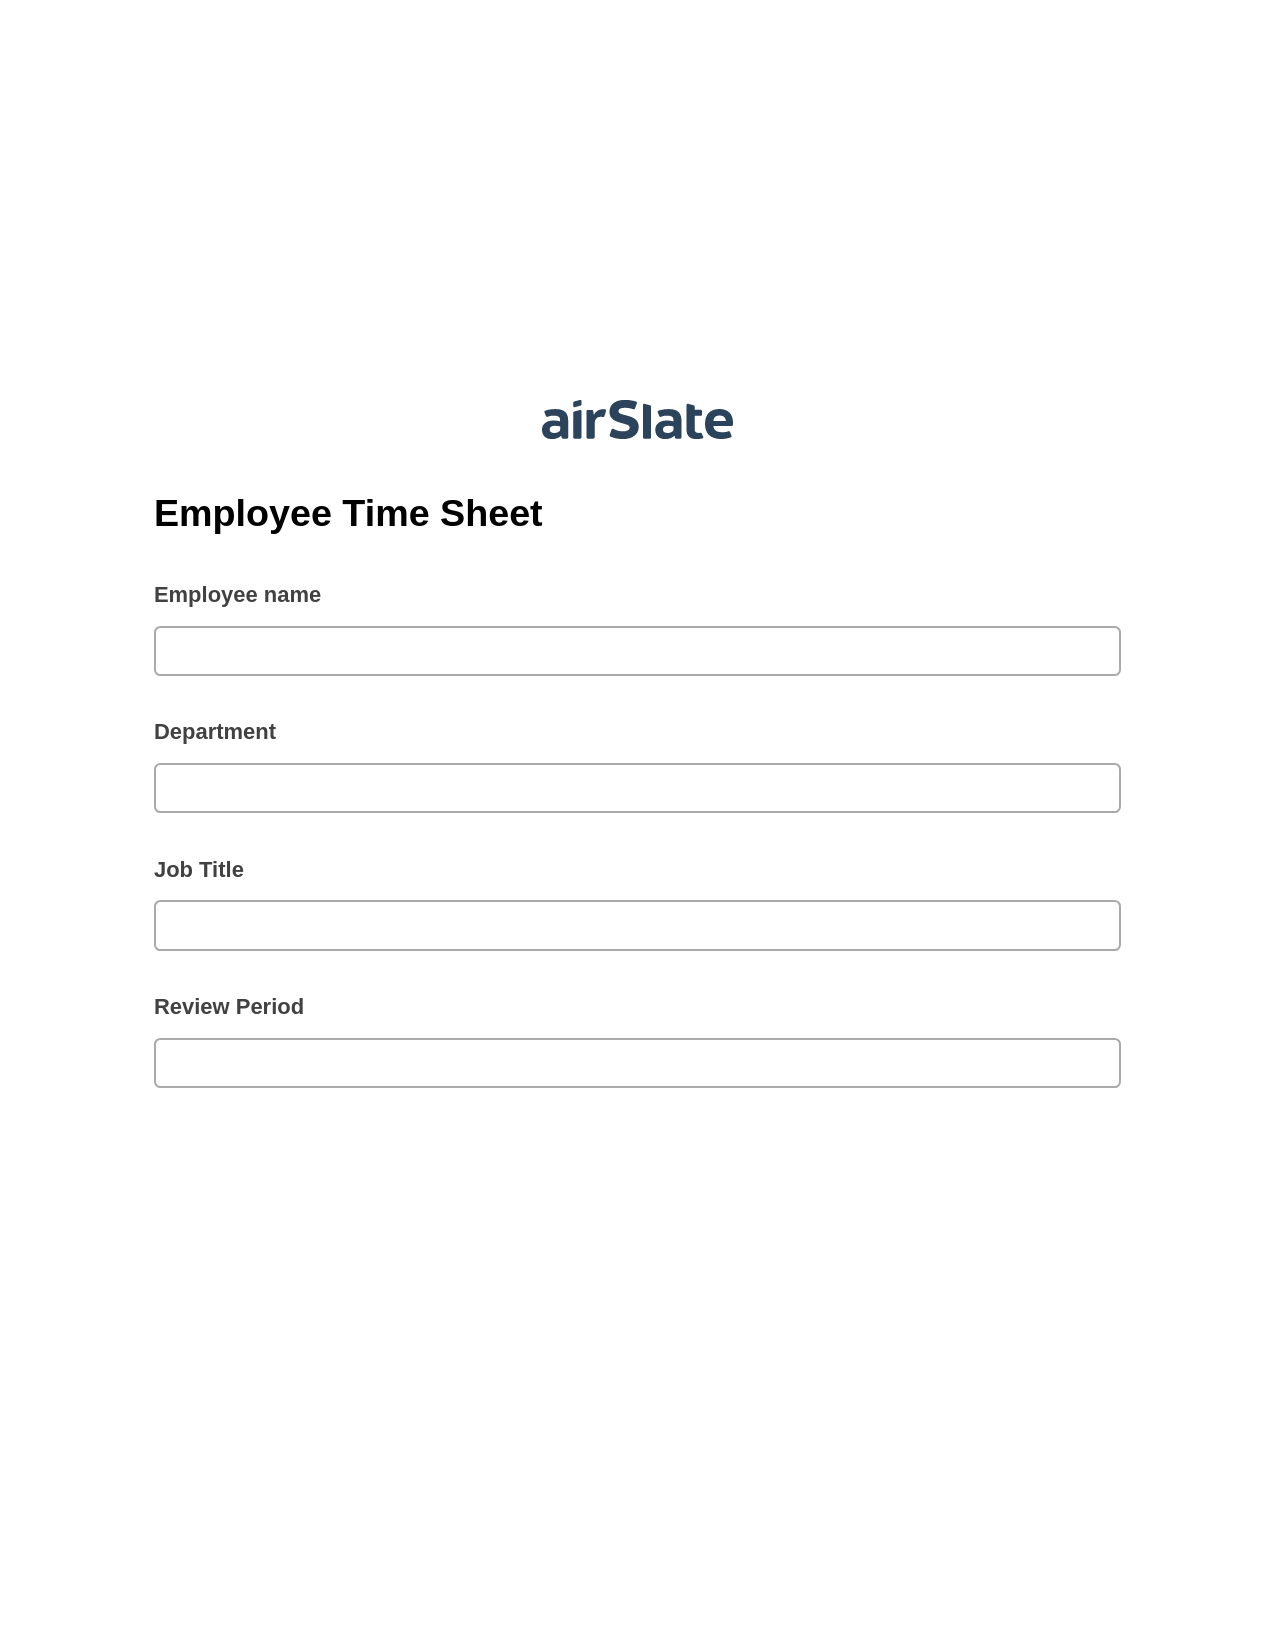 Employee Time Sheet Pre-fill Dropdowns from Airtable, Update Audit Trail Bot, Archive to SharePoint Folder Bot